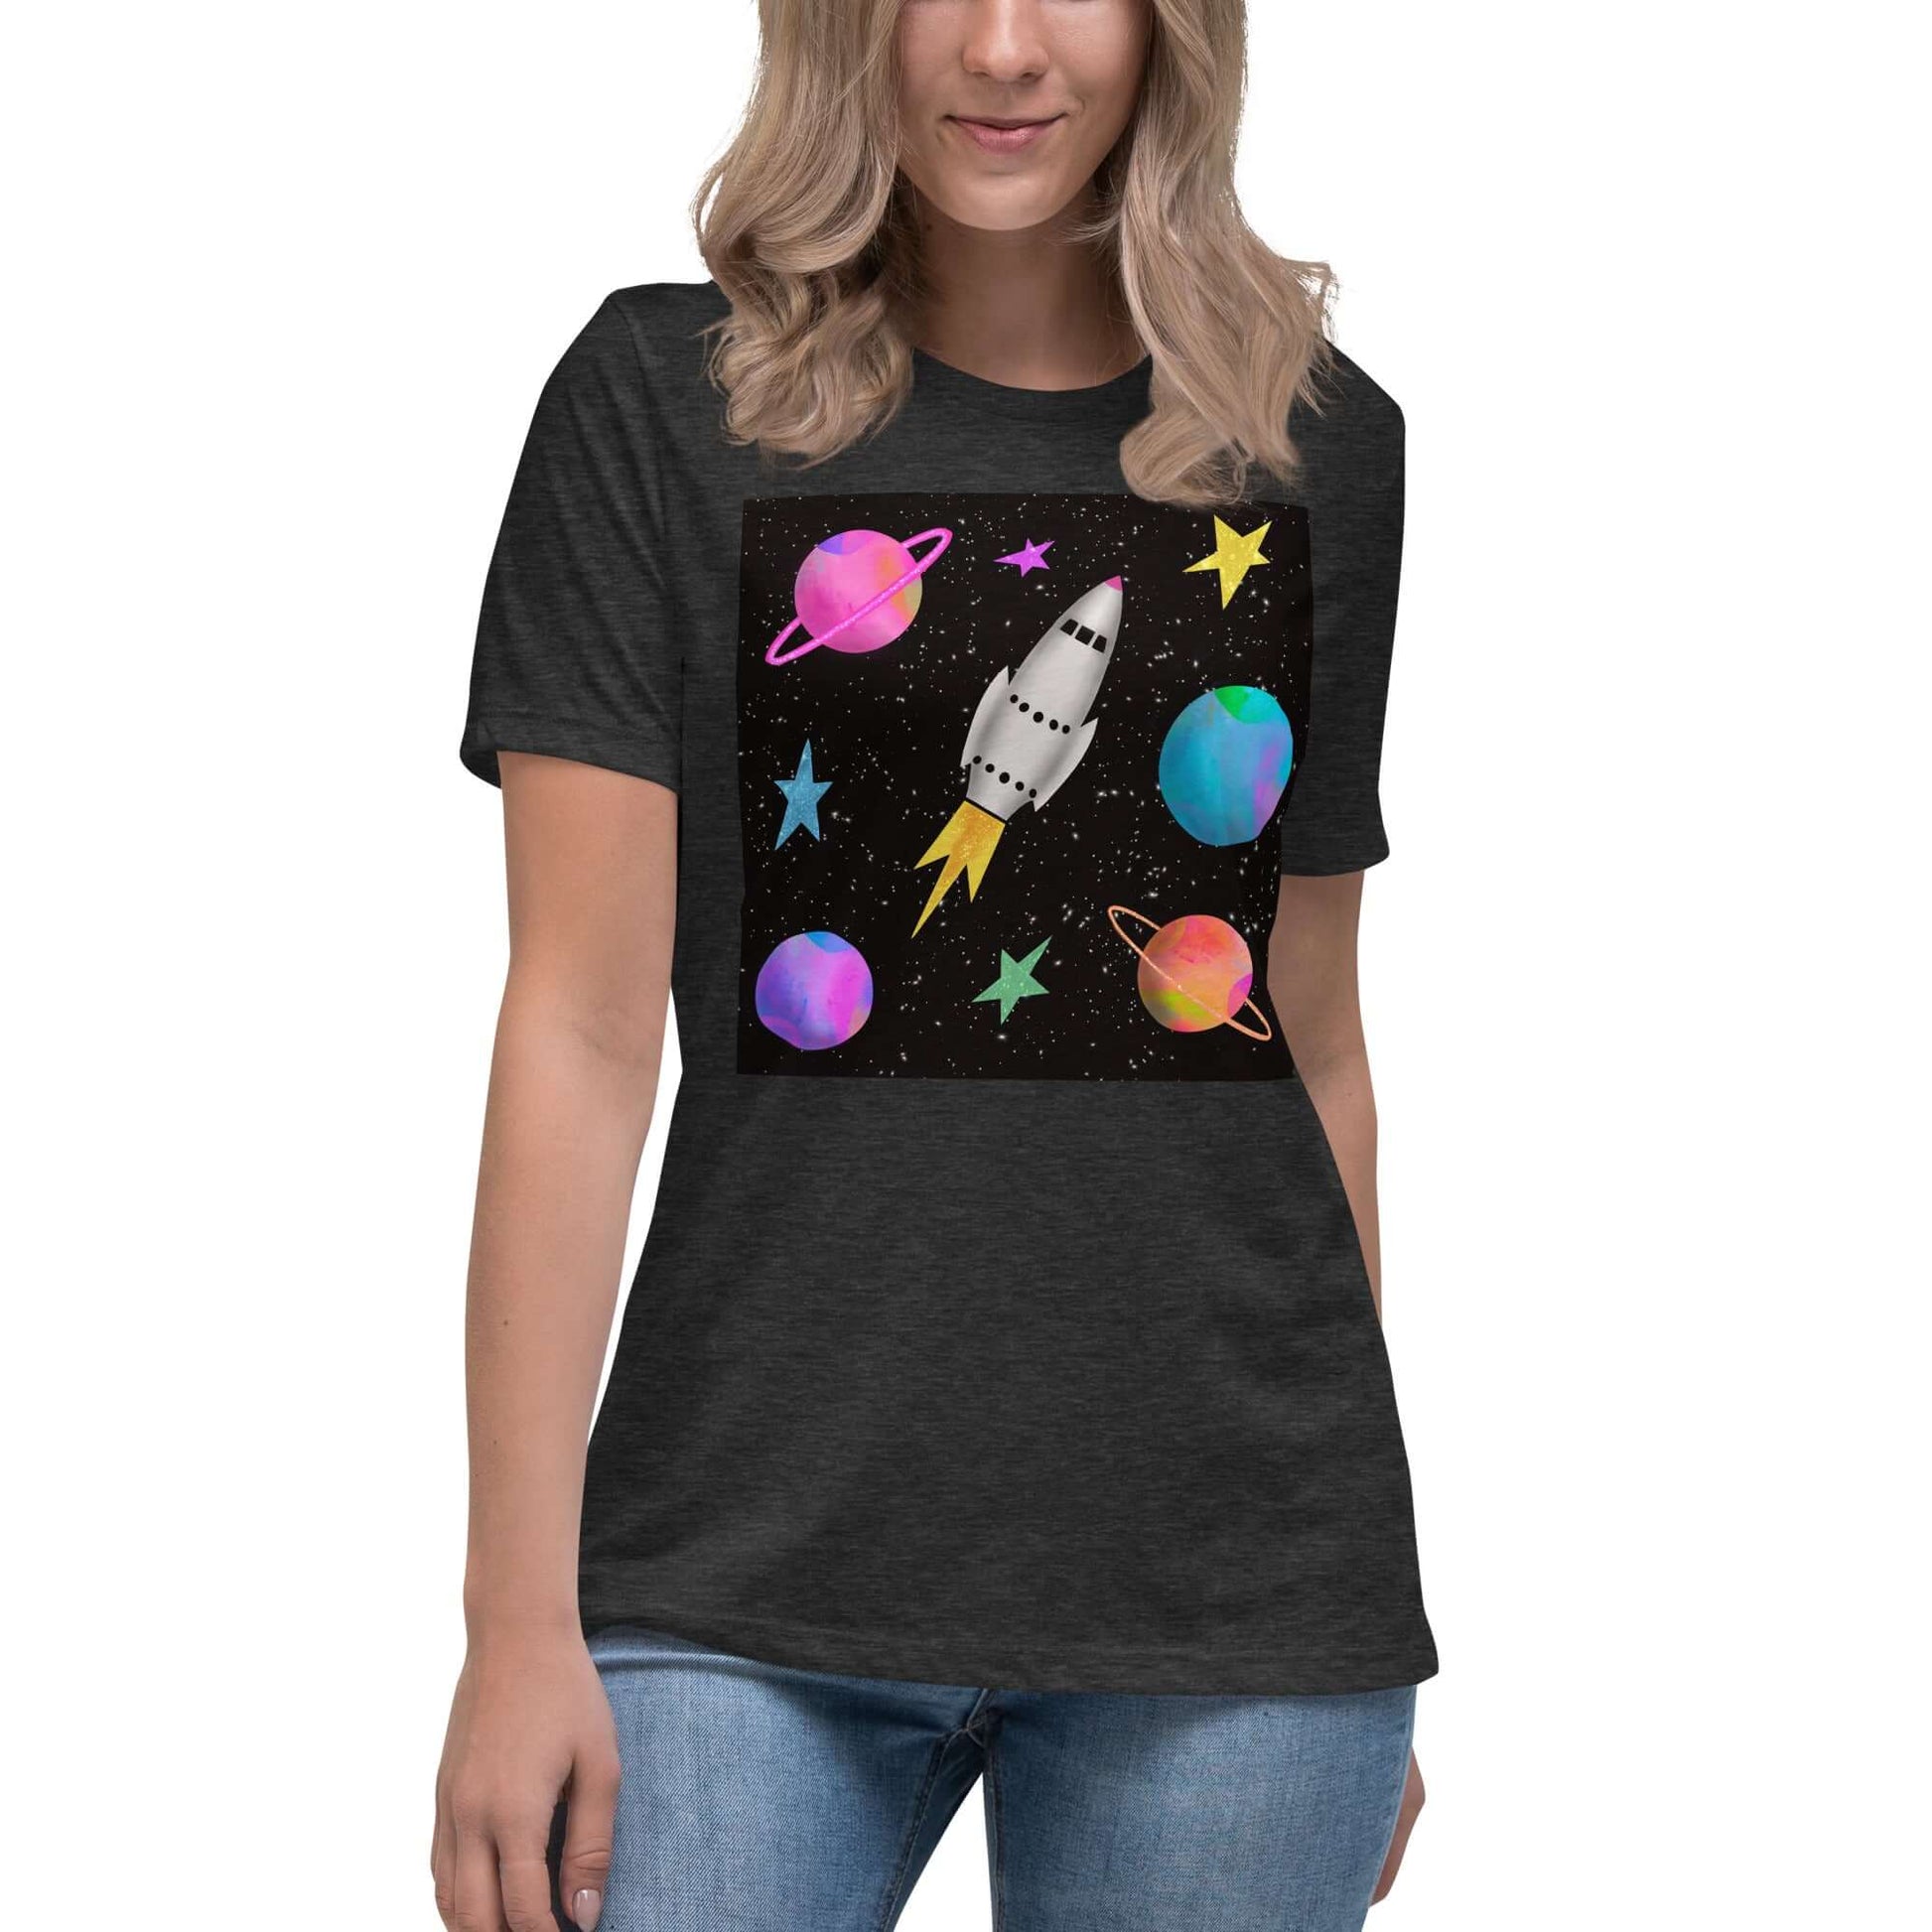 Rocket with Colorful Stars and Planets “Space Rockets” Women’s Short Sleeve Tee in Dark Gray Heather